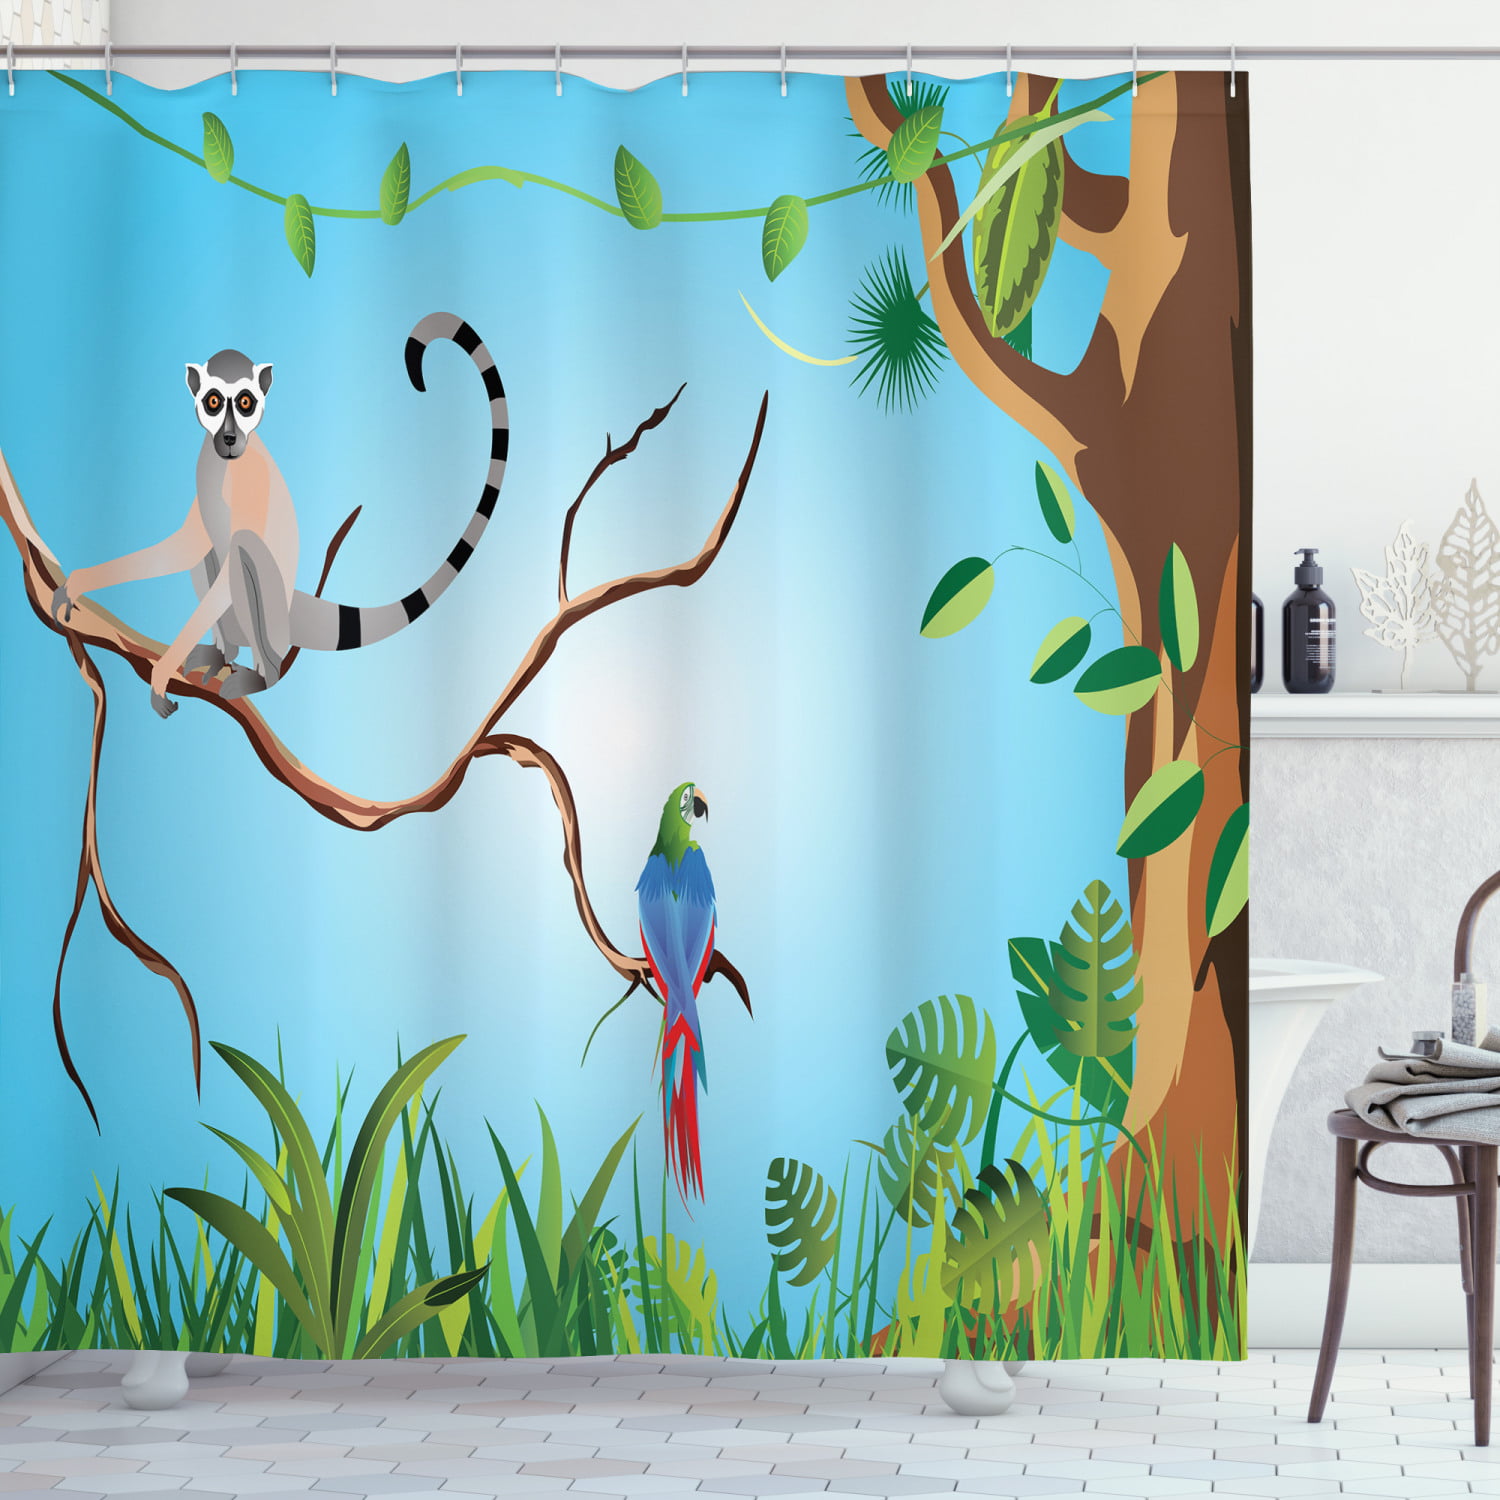 Dragon and cave Shower Curtain Bathroom Waterproof Fabric & 12hooks 71*71inches 